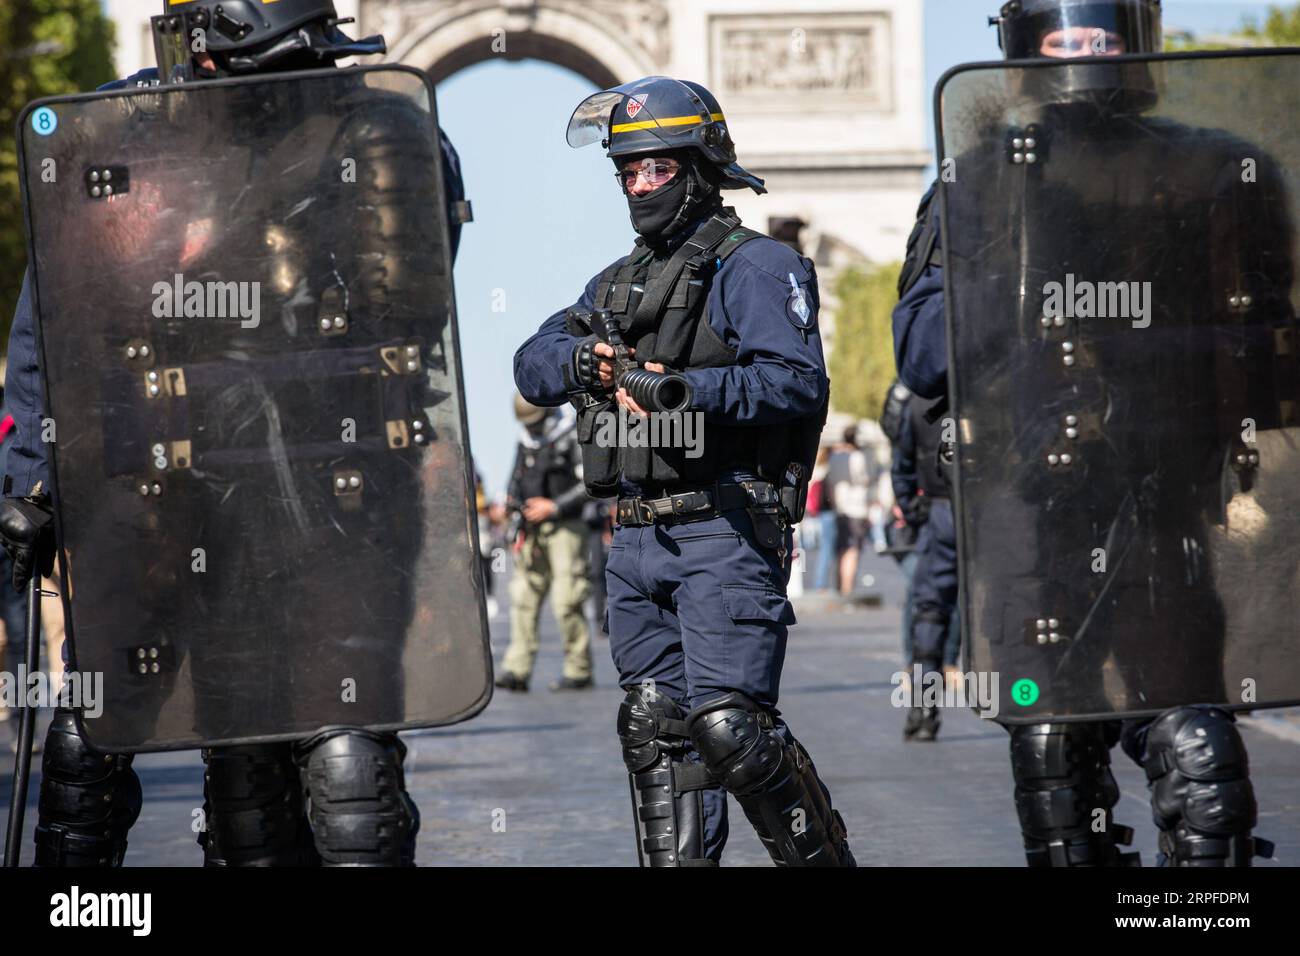 190921 -- PARIS, Sept. 21, 2019 -- Police officers stand guard on the Champs Elysees in Paris, France, Sept. 21, 2019. French police had arrested 137 individuals in Paris by 16:00 local time 1400 GMT, as Yellow Vest protests against President Emmanuel Macron s fiscal policy hit streets again on Saturday. In Paris, 7,500 police officers have been poured in and armored vehicles were deployed to handle more threats of rioting that, according to the government, risks to taint the social movement s 45th weekend of action. Photo by Aurelien Morissard/Xinhua FRANCE-PARIS-PROTEST-POLICE- YELLOW VEST A Stock Photo